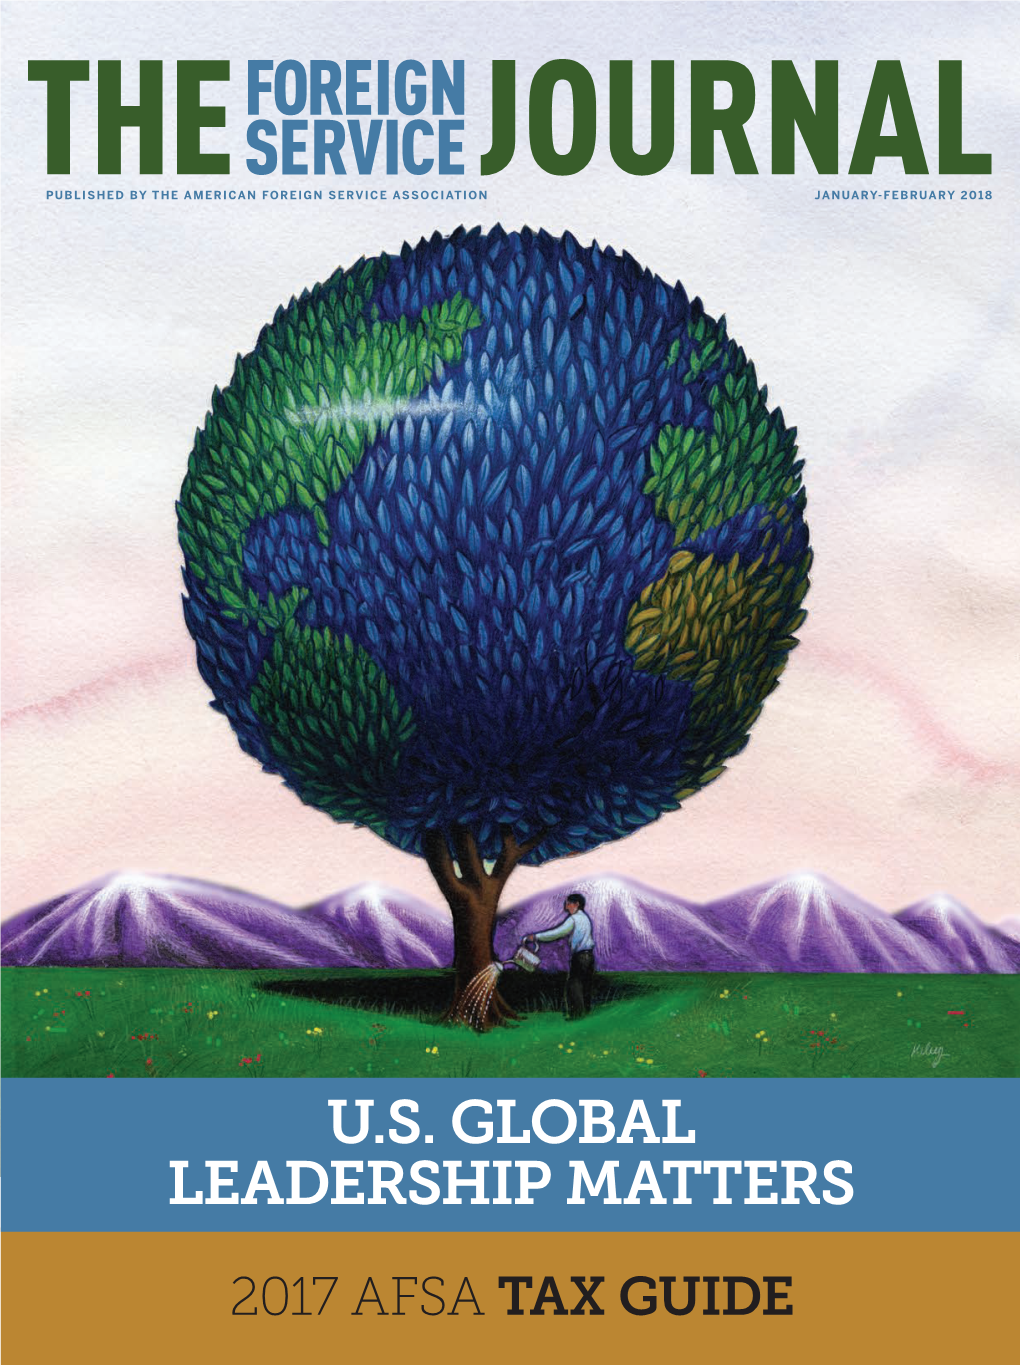 The Foreign Service Journal, January-February 2018